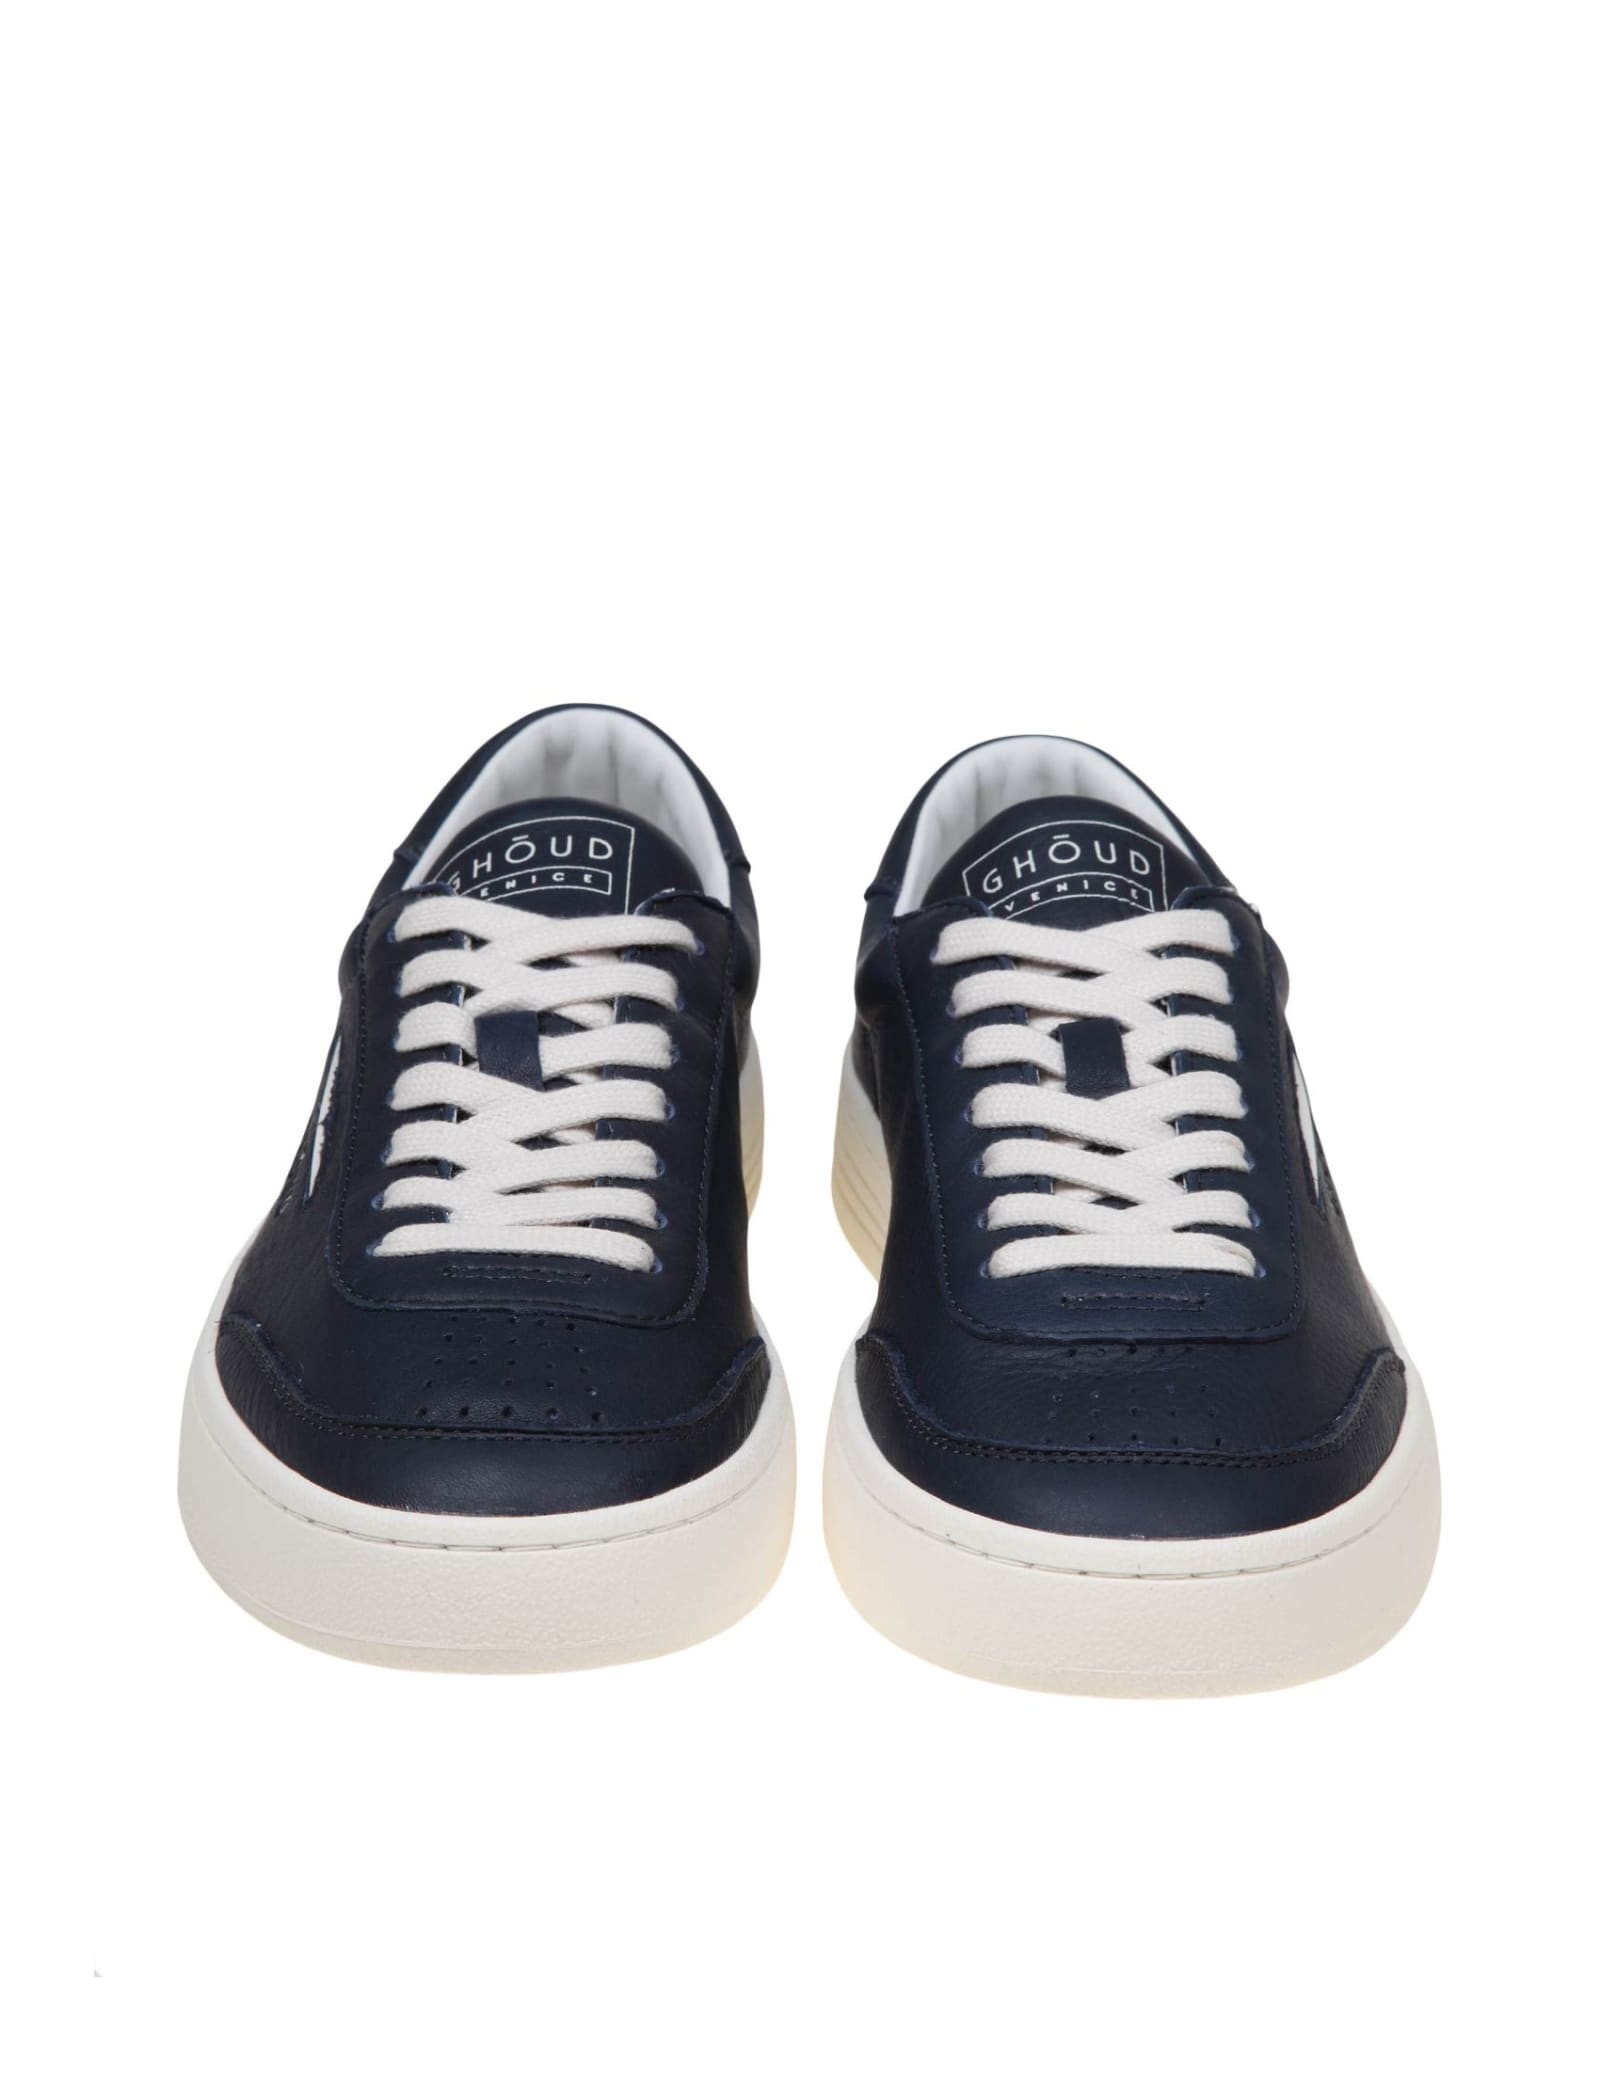 Shop Ghoud Lido Low Sneakers In Blue Leather